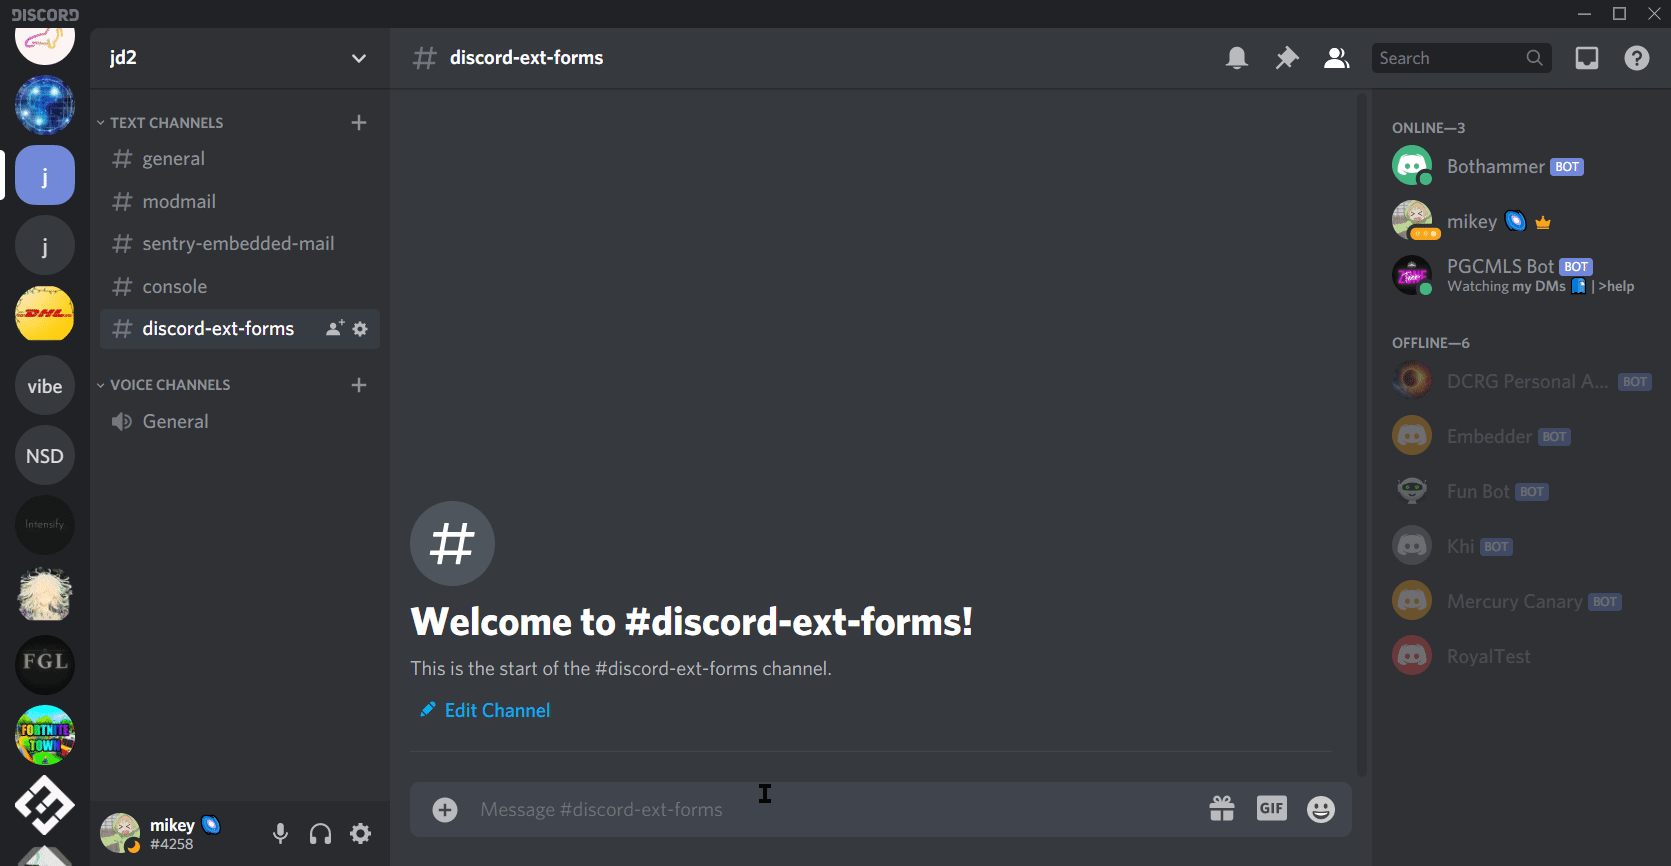 discord-ext-forms